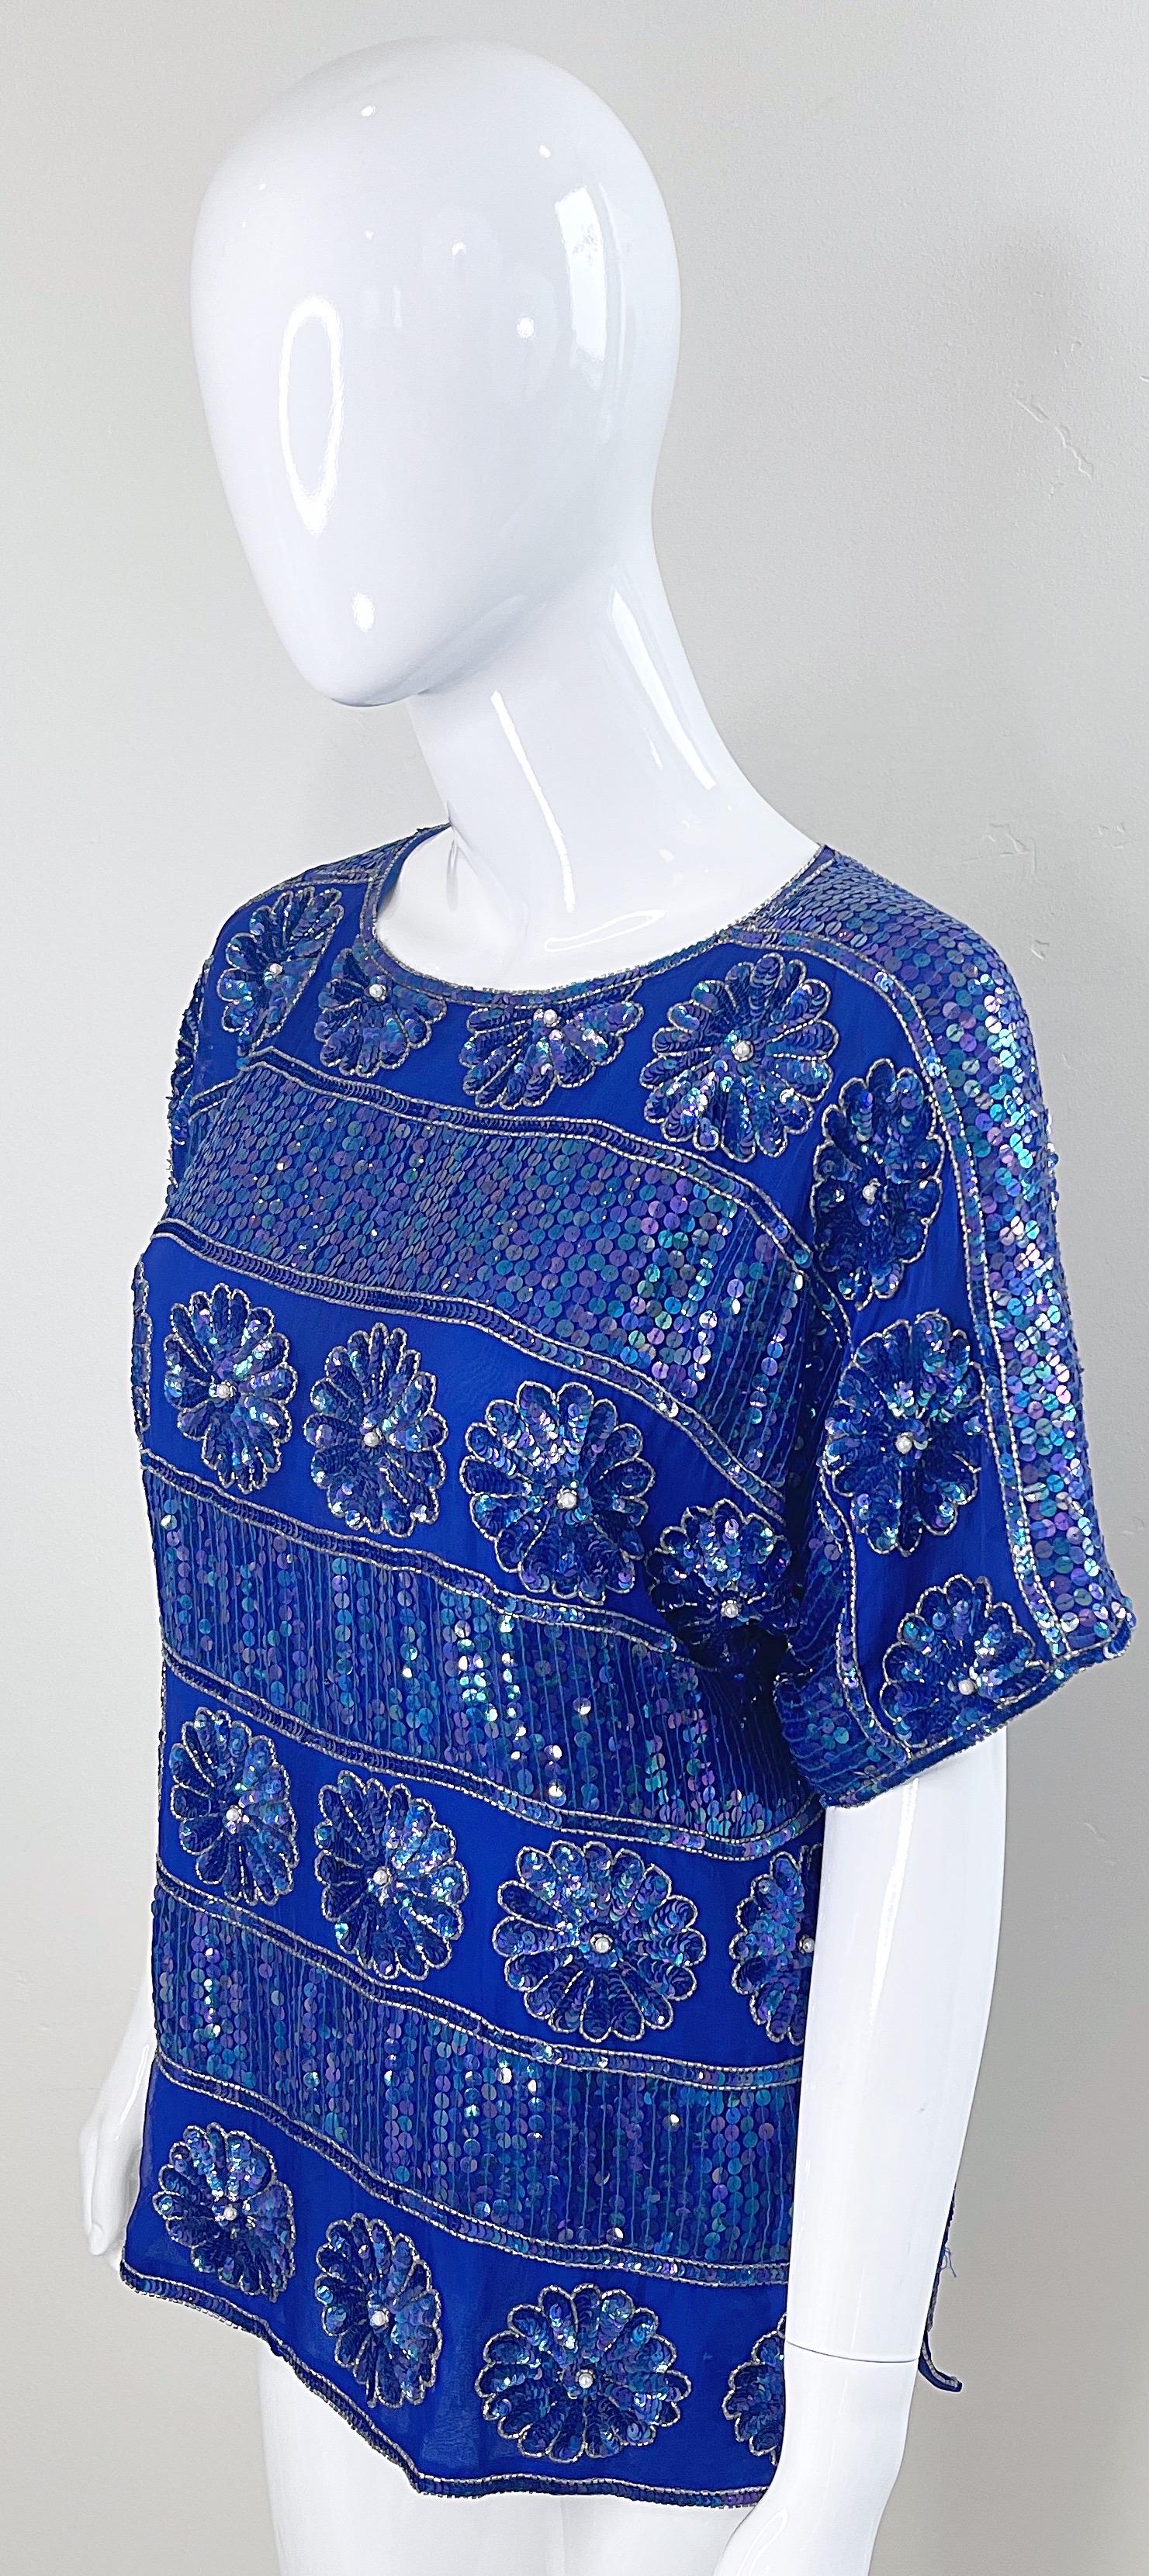 1980s Royal Blue Silk Chiffon Sequin Beaded Pearl Vintage 80s Blouse Shirt Top For Sale 2